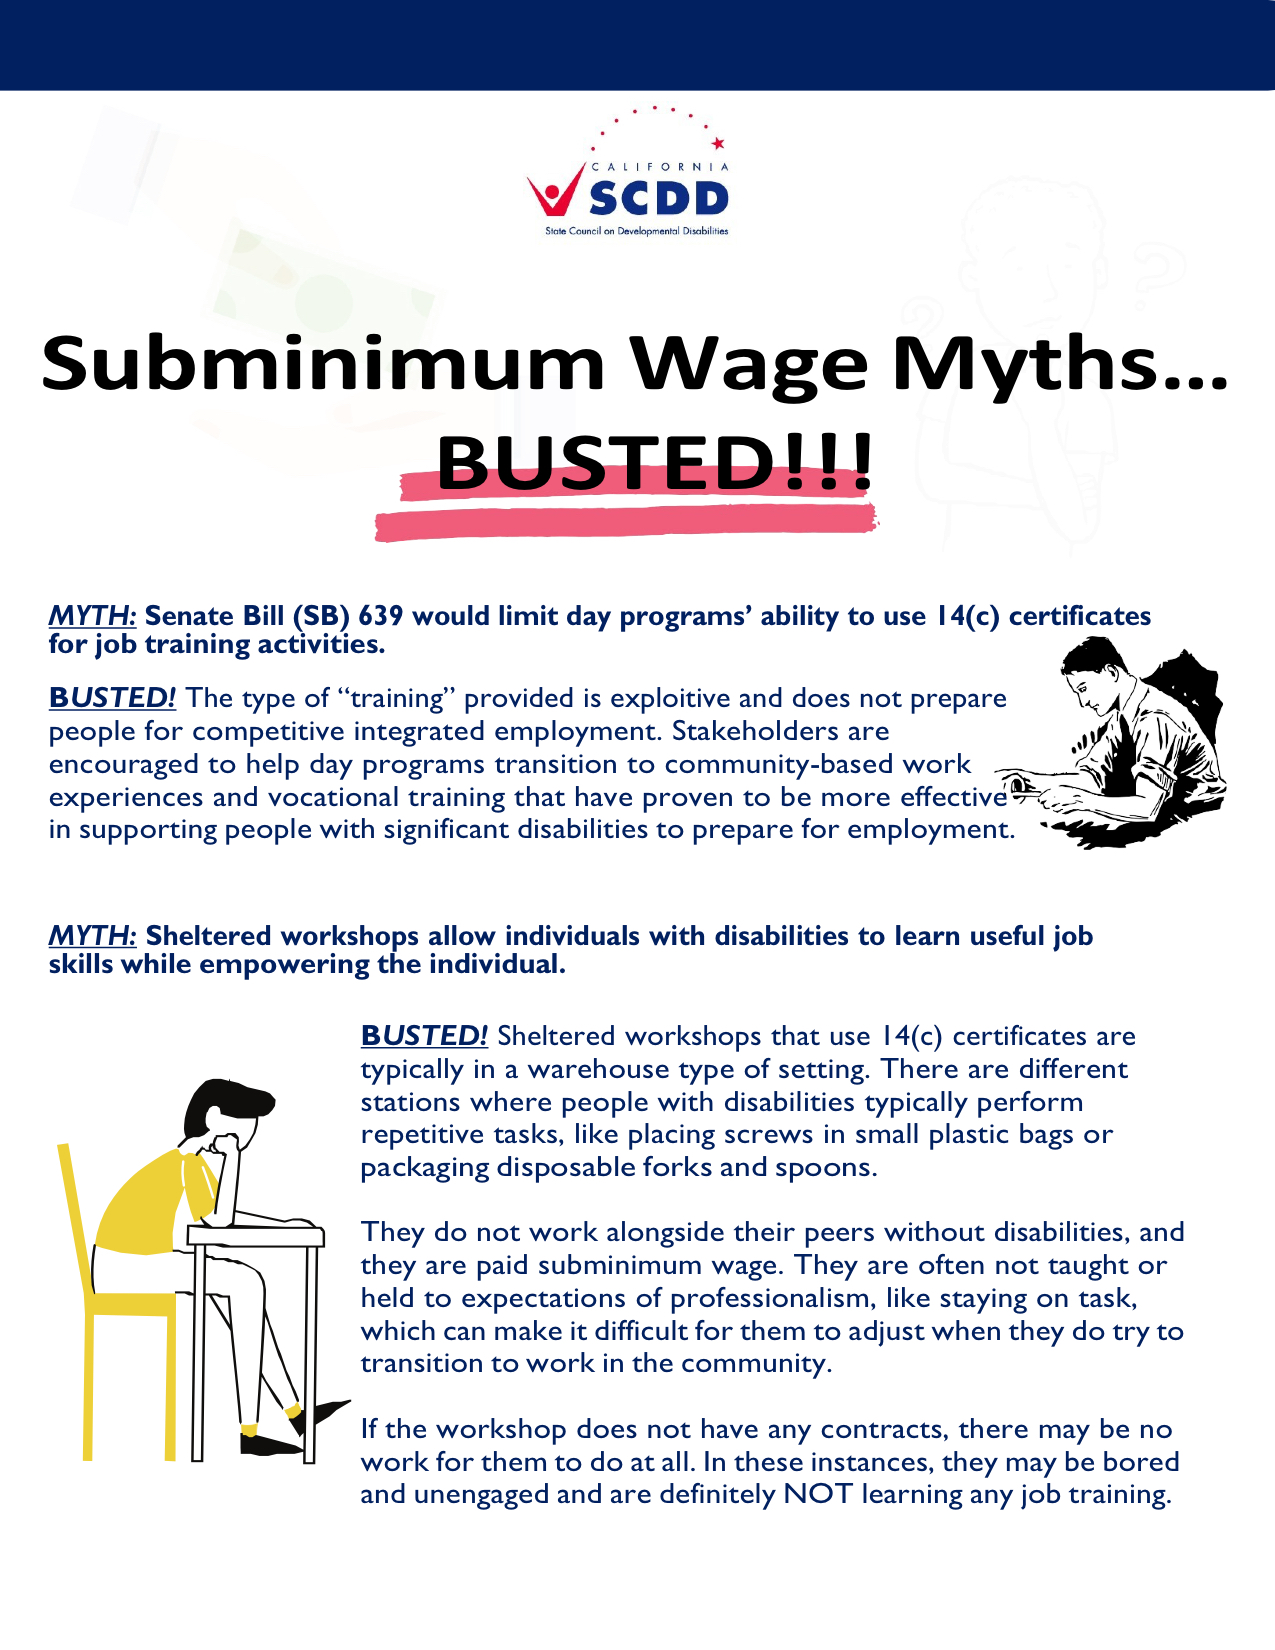 SCDD Subminimum Wage Myths...BUSTED! - Chapman University | Transition CA